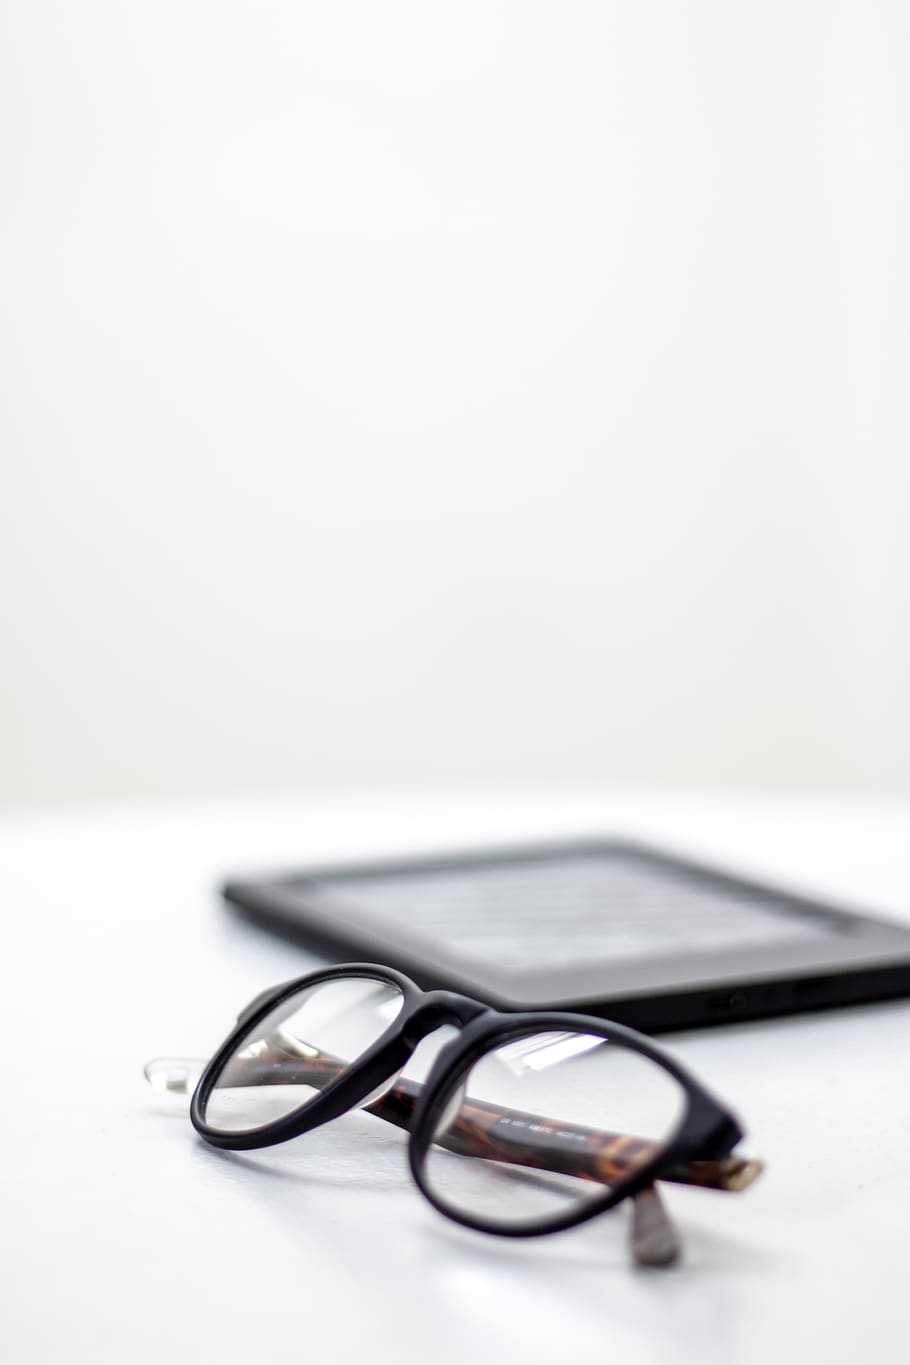 glasses, white, table, tablet, reading, close up, bokeh, background, copy space, eyewear